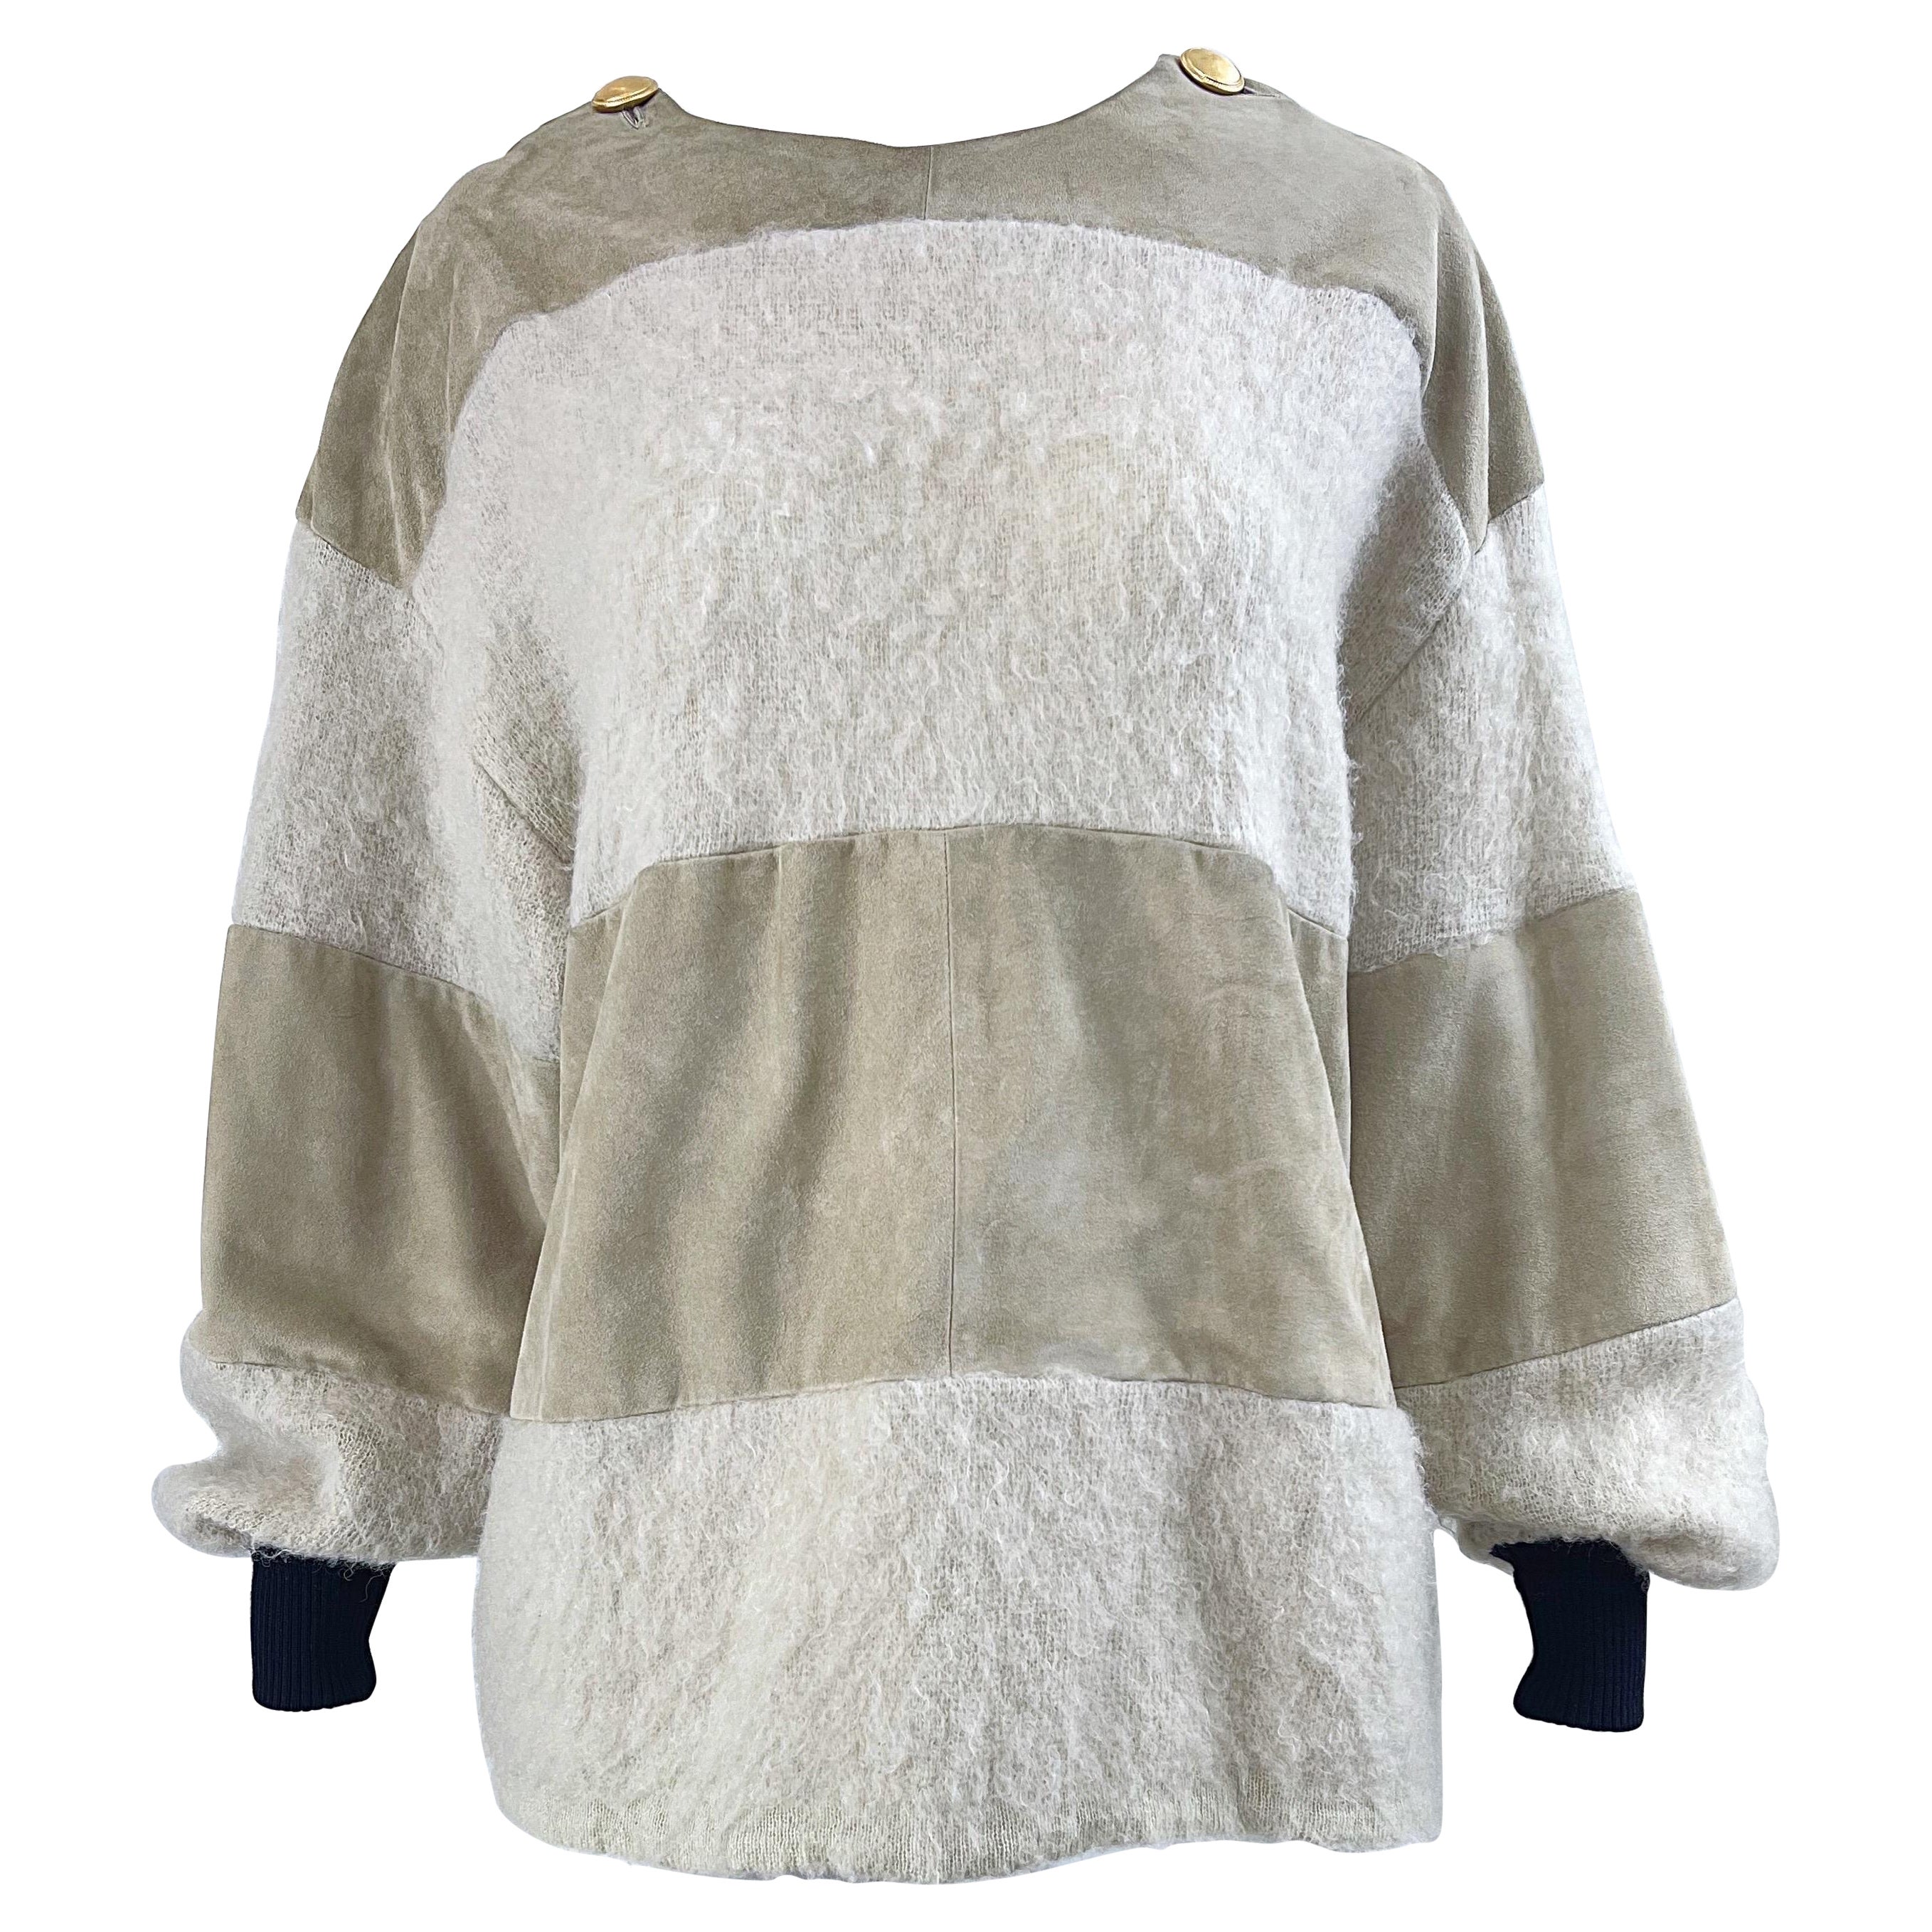 Gianfranco Ferre 1990s Leather Suede + Mohair Tan Nude Vintage 90s Sweater Top For Sale